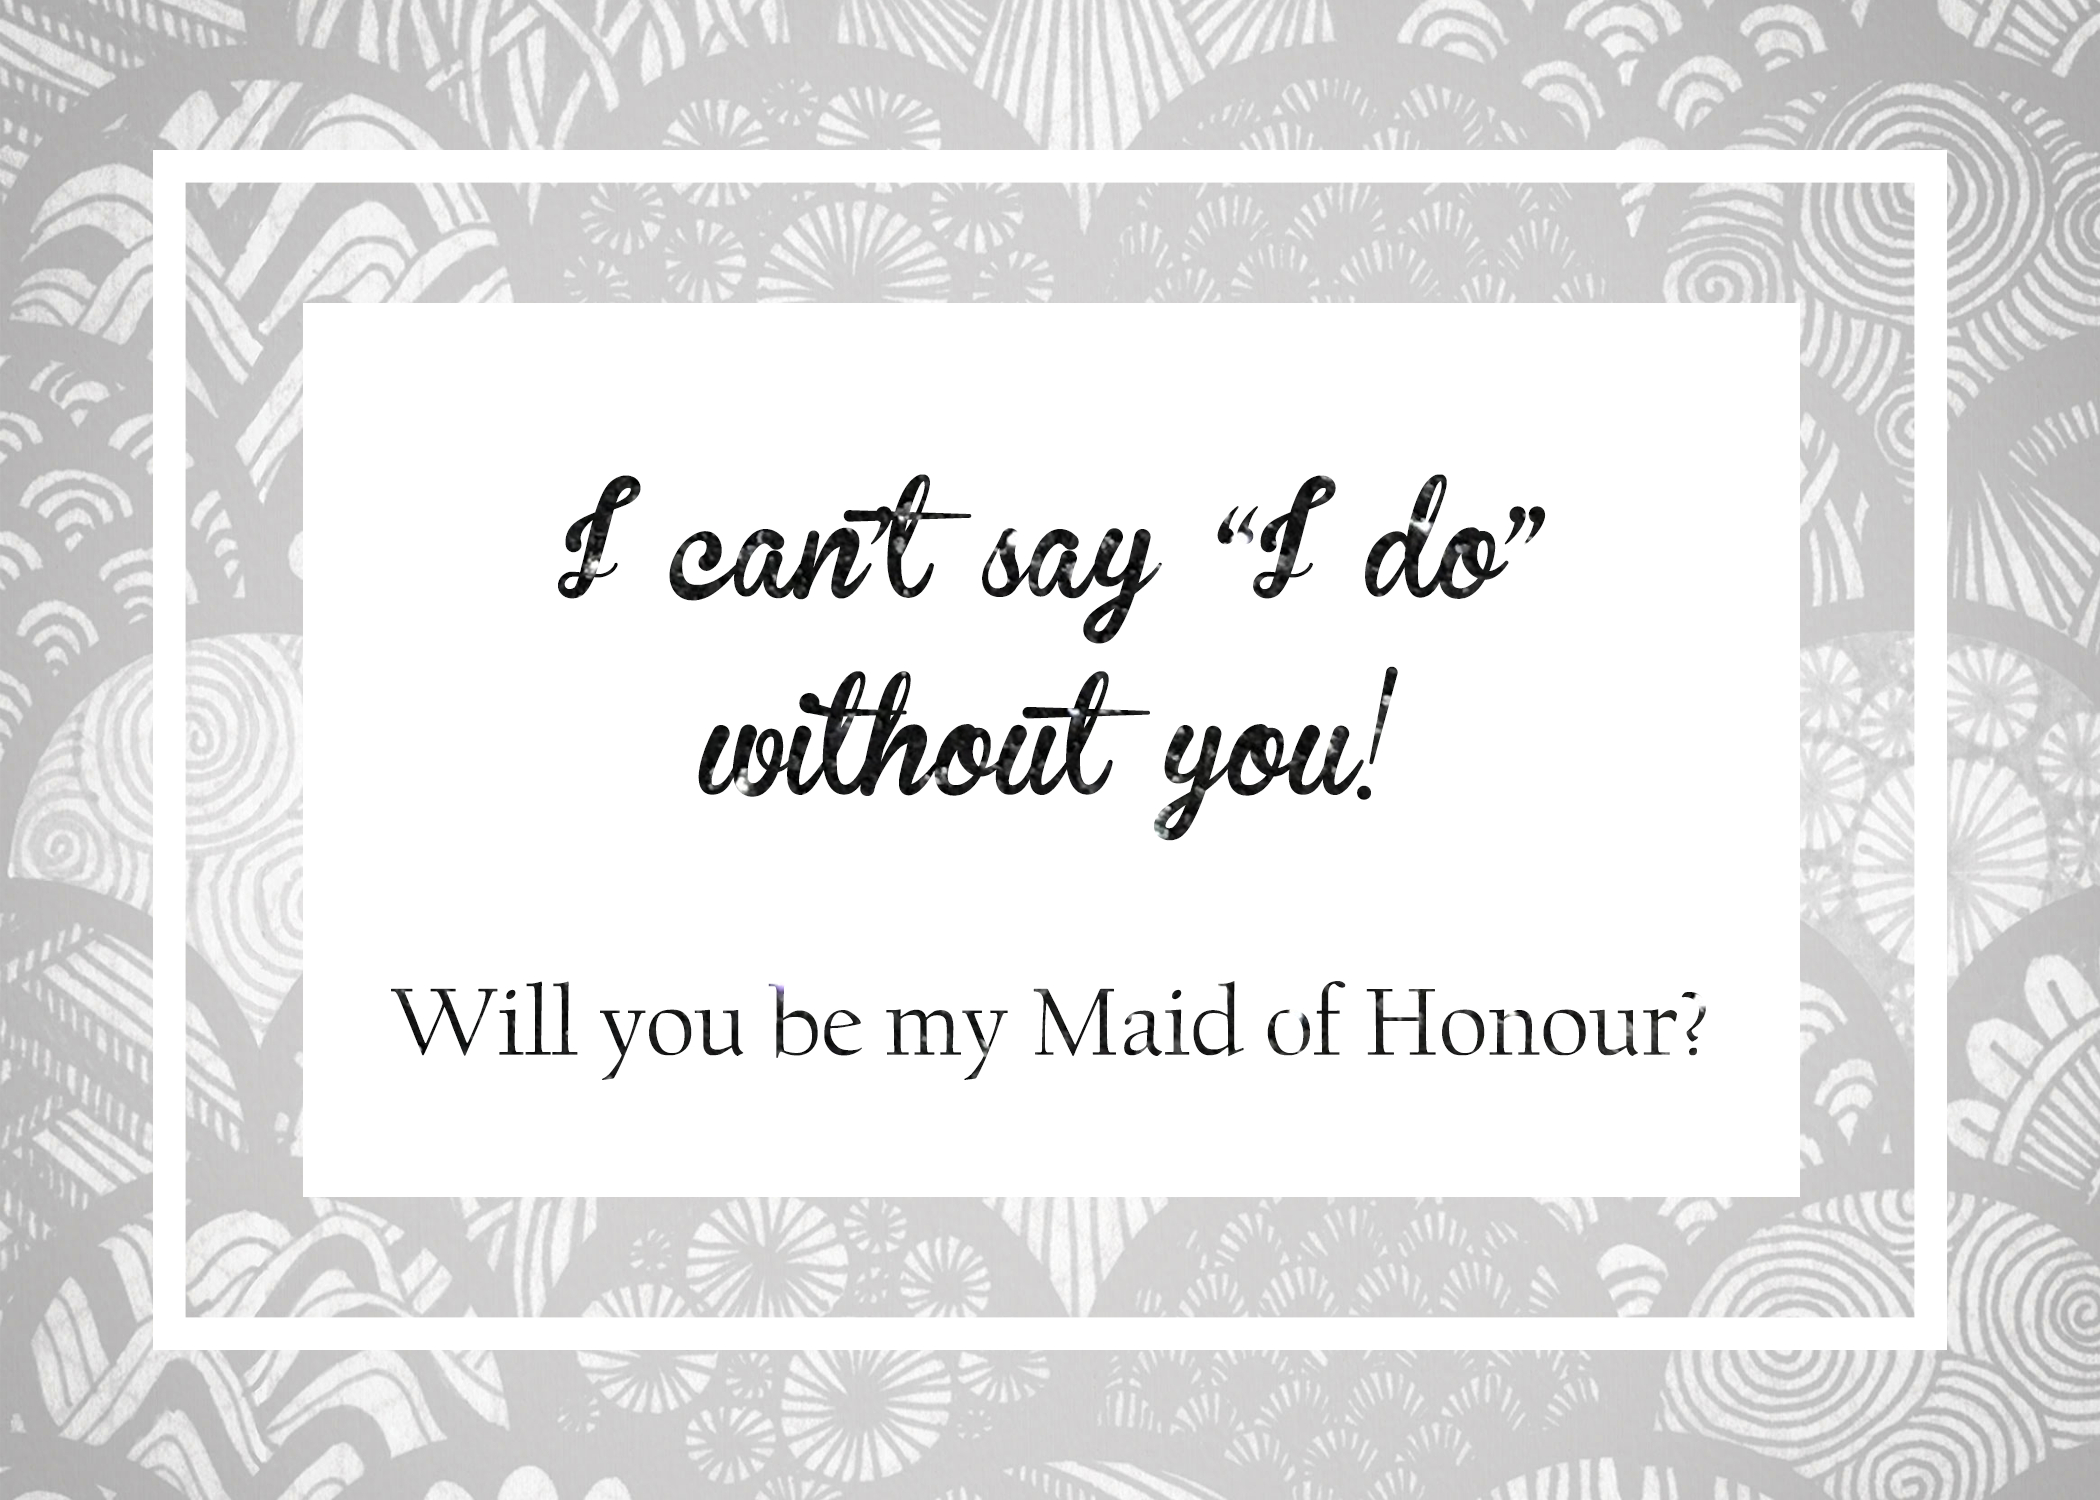 Will You Be My Maid Of Honour Free Printable 4 5 X 7 • Fleurieu - I Can T Say I Do Without You Free Printable